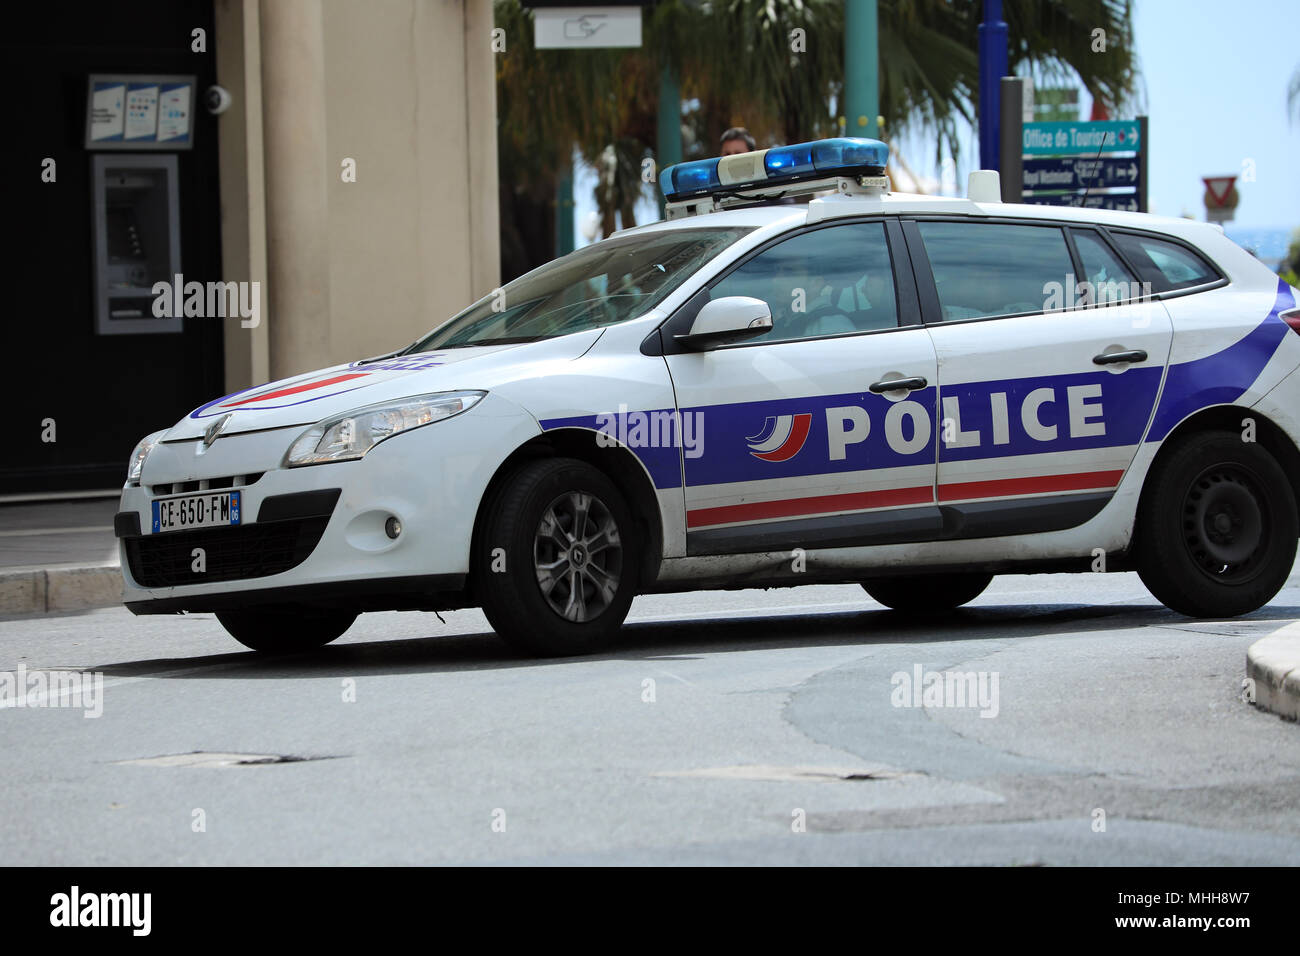 Renault Police Car High Resolution Stock Photography and Images - Alamy